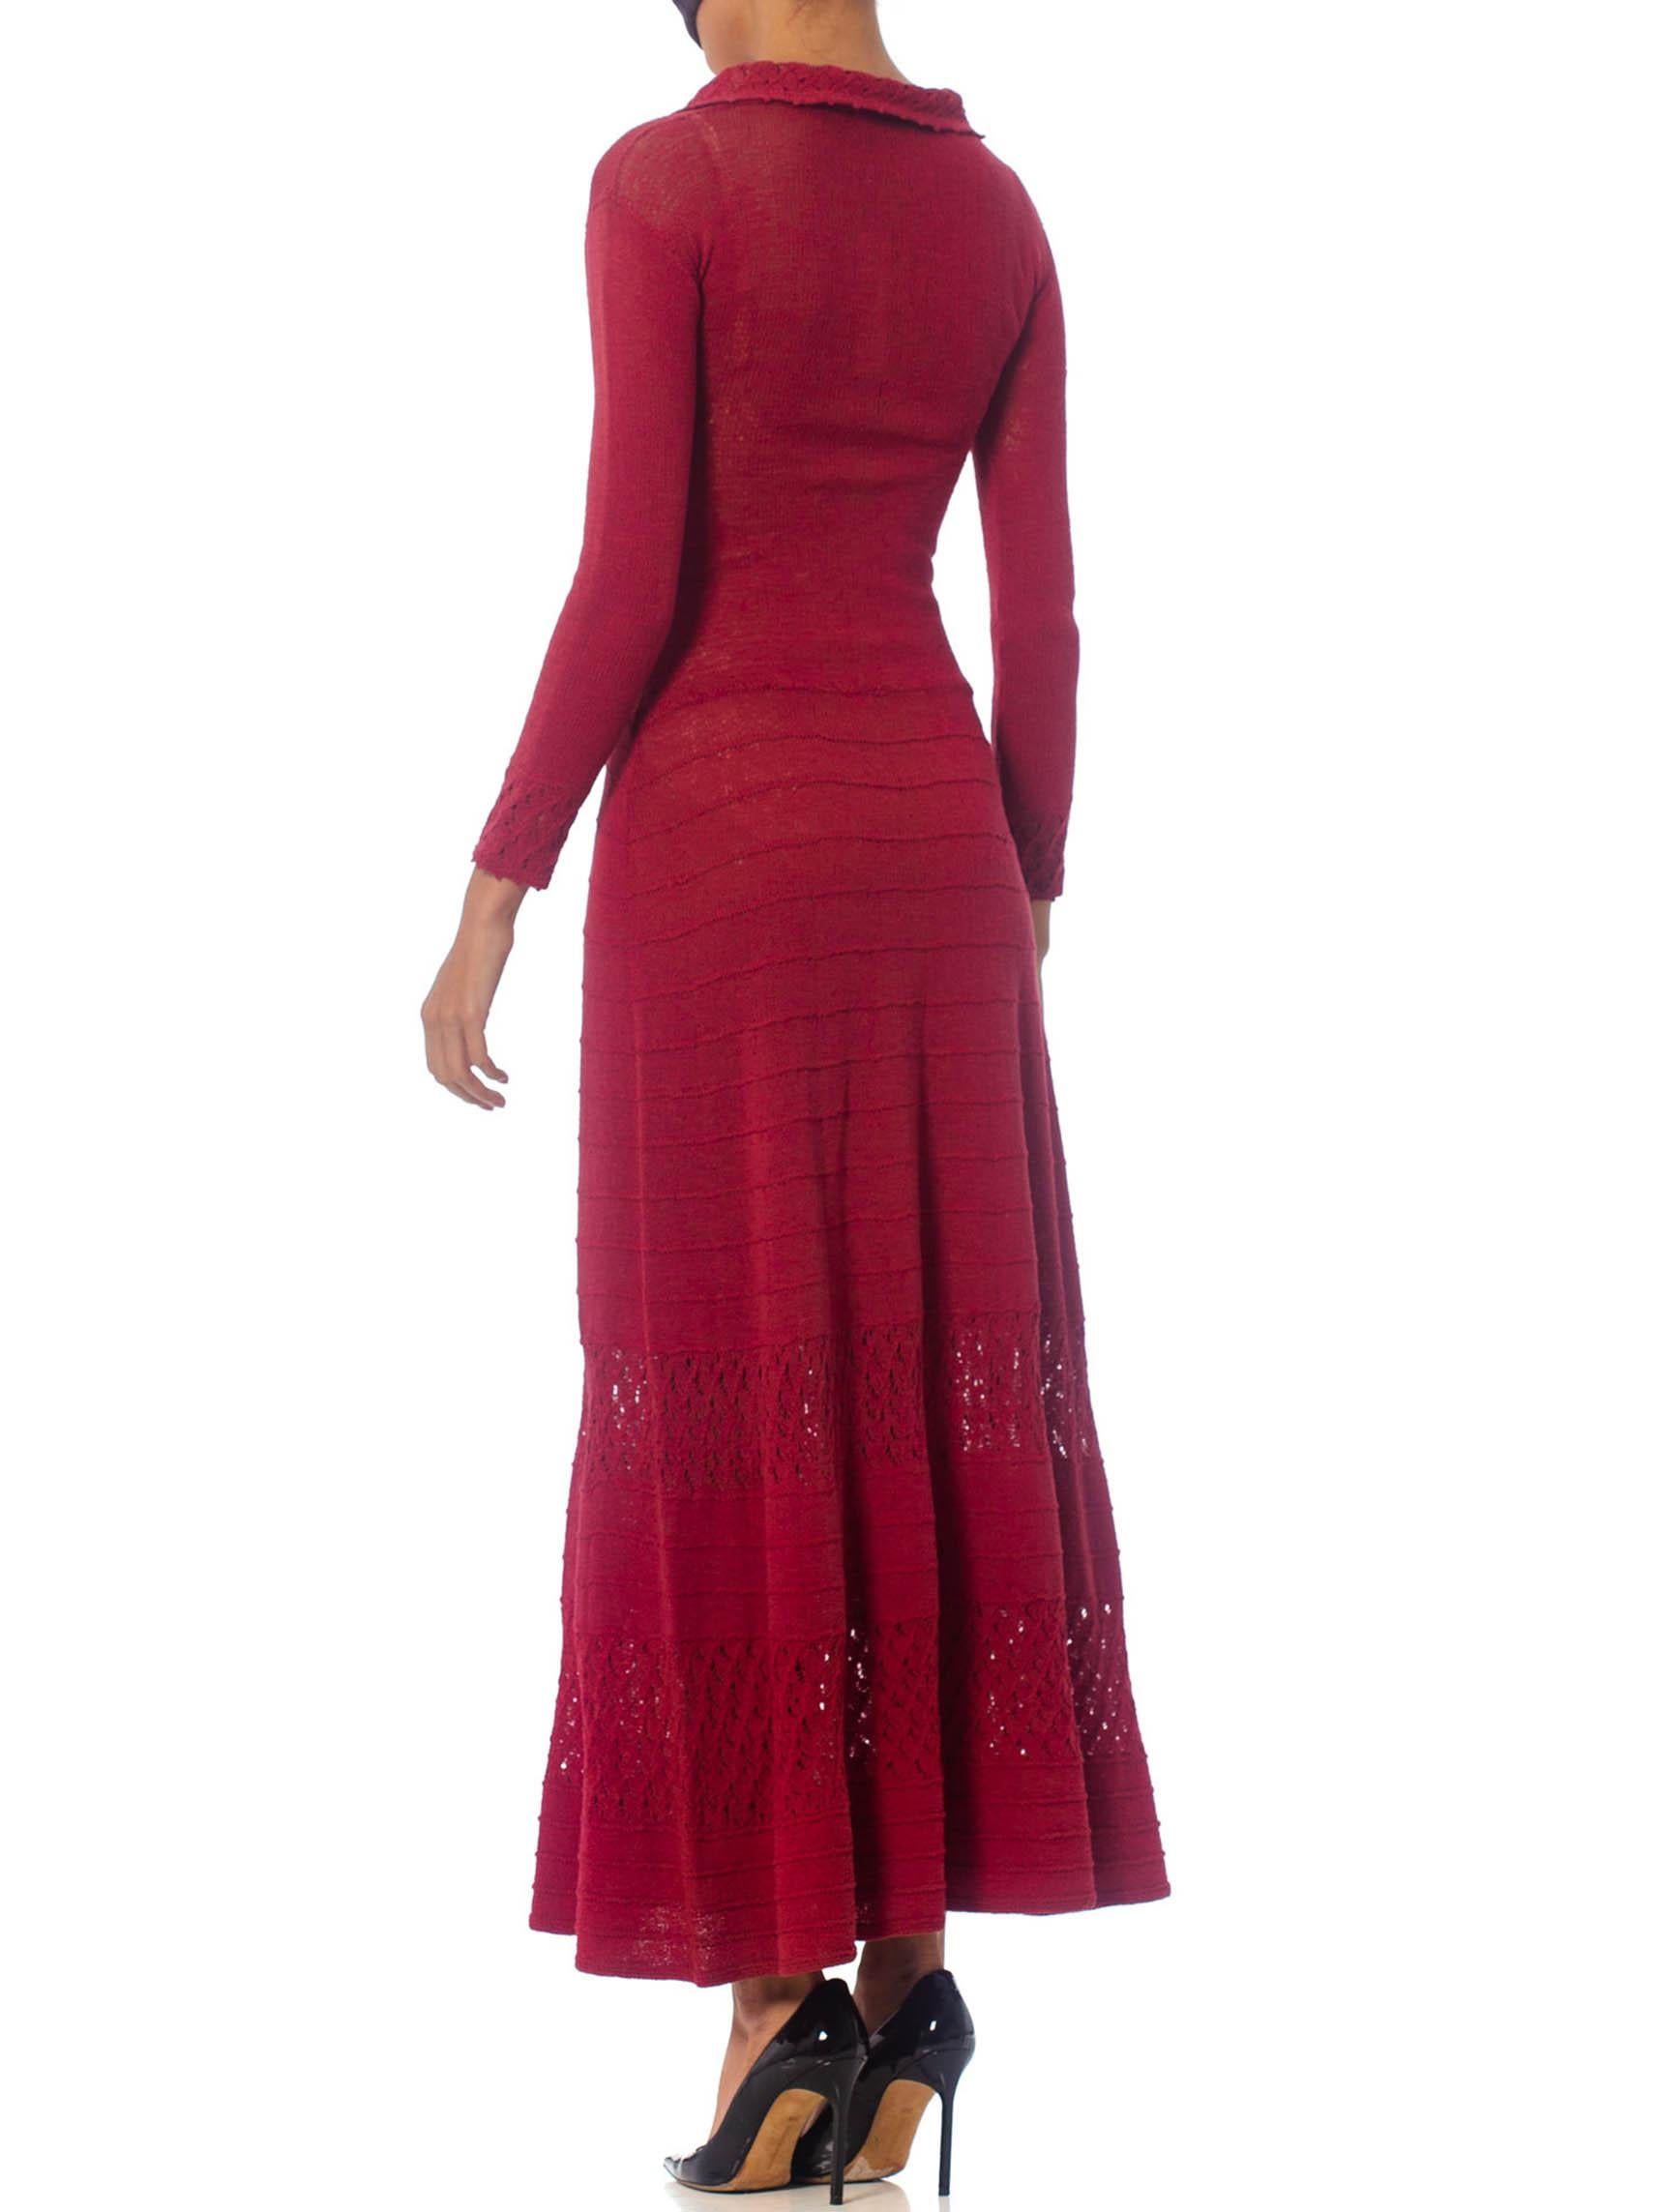 Women's 1930S Cranberry Red Rare Rayon Blend Knit Maxi Dress With Sleeves